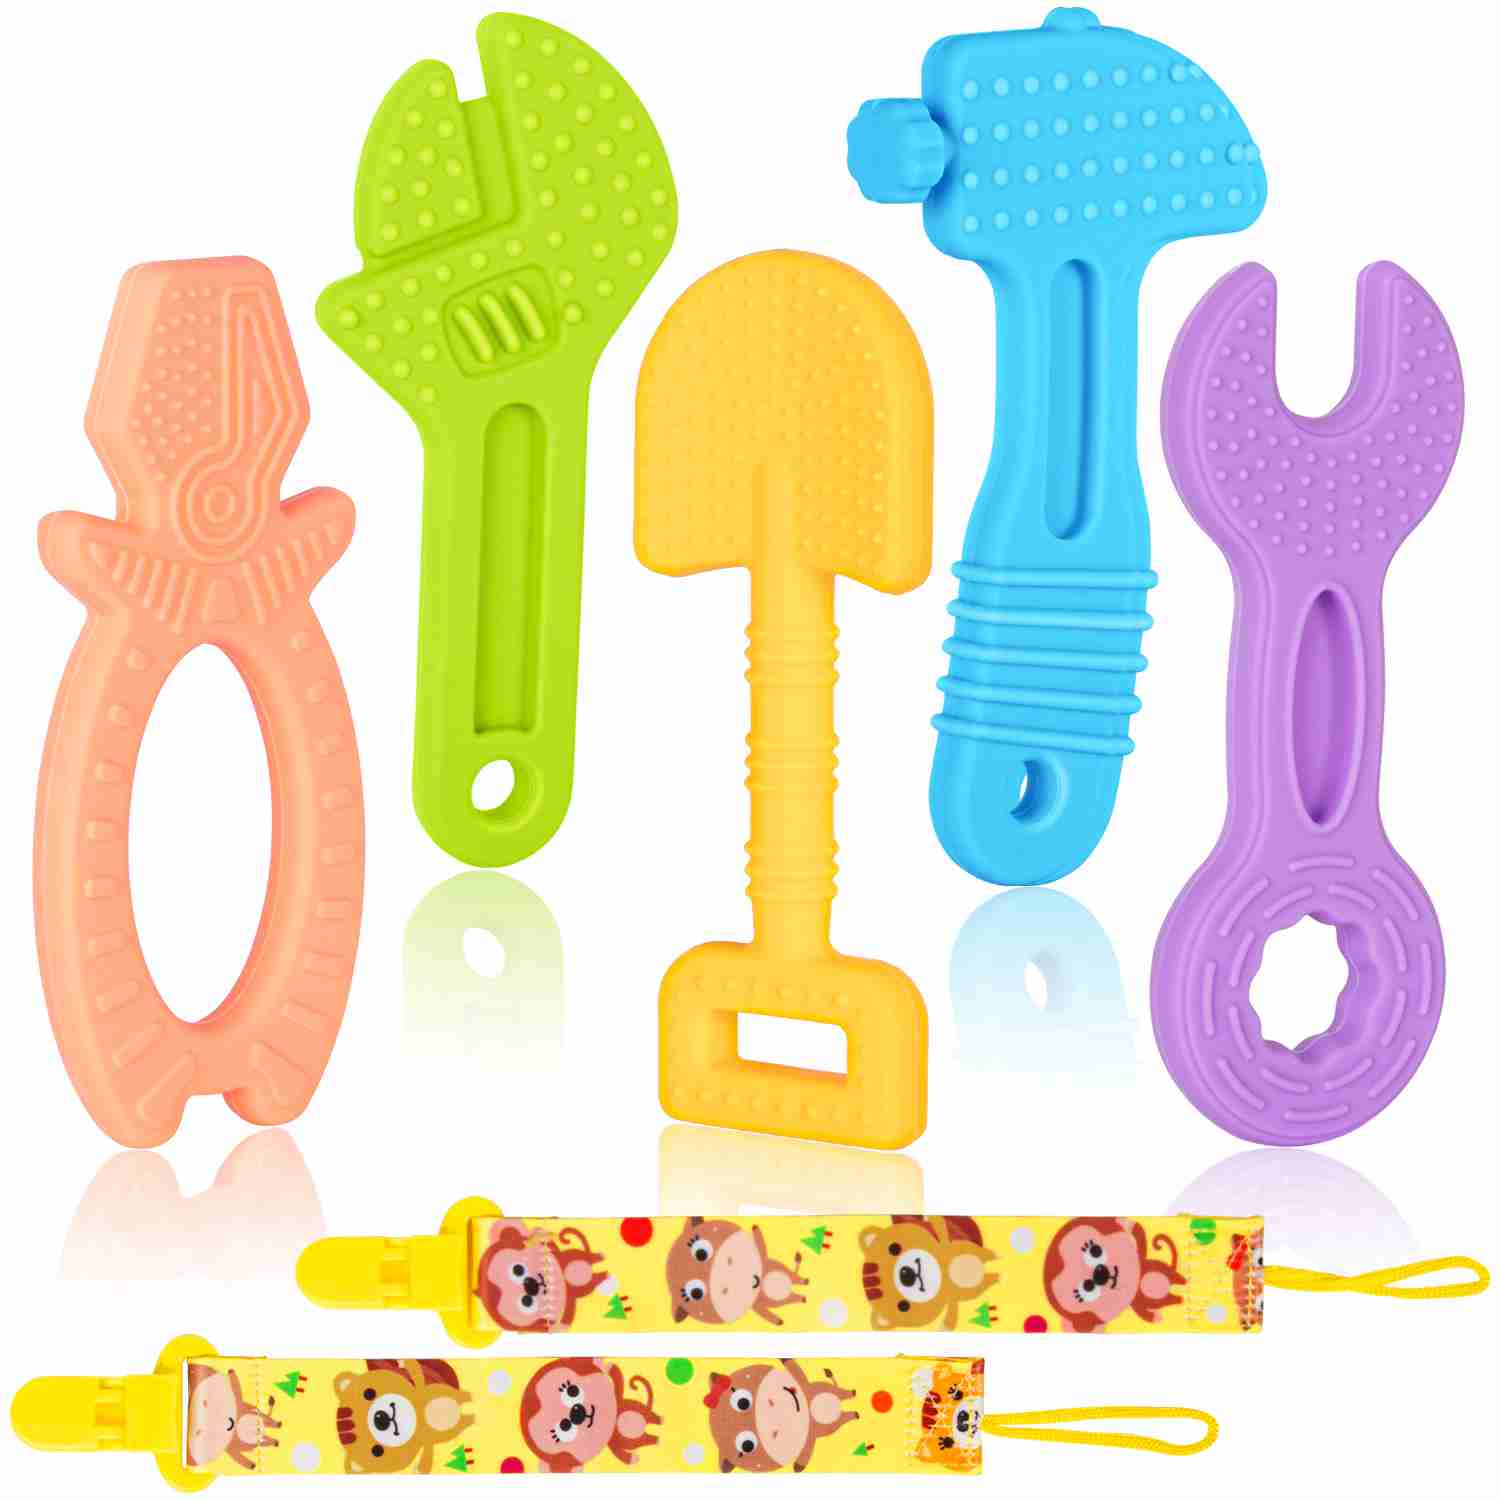 teethers-for-babies-0-6-months with cash back rebate